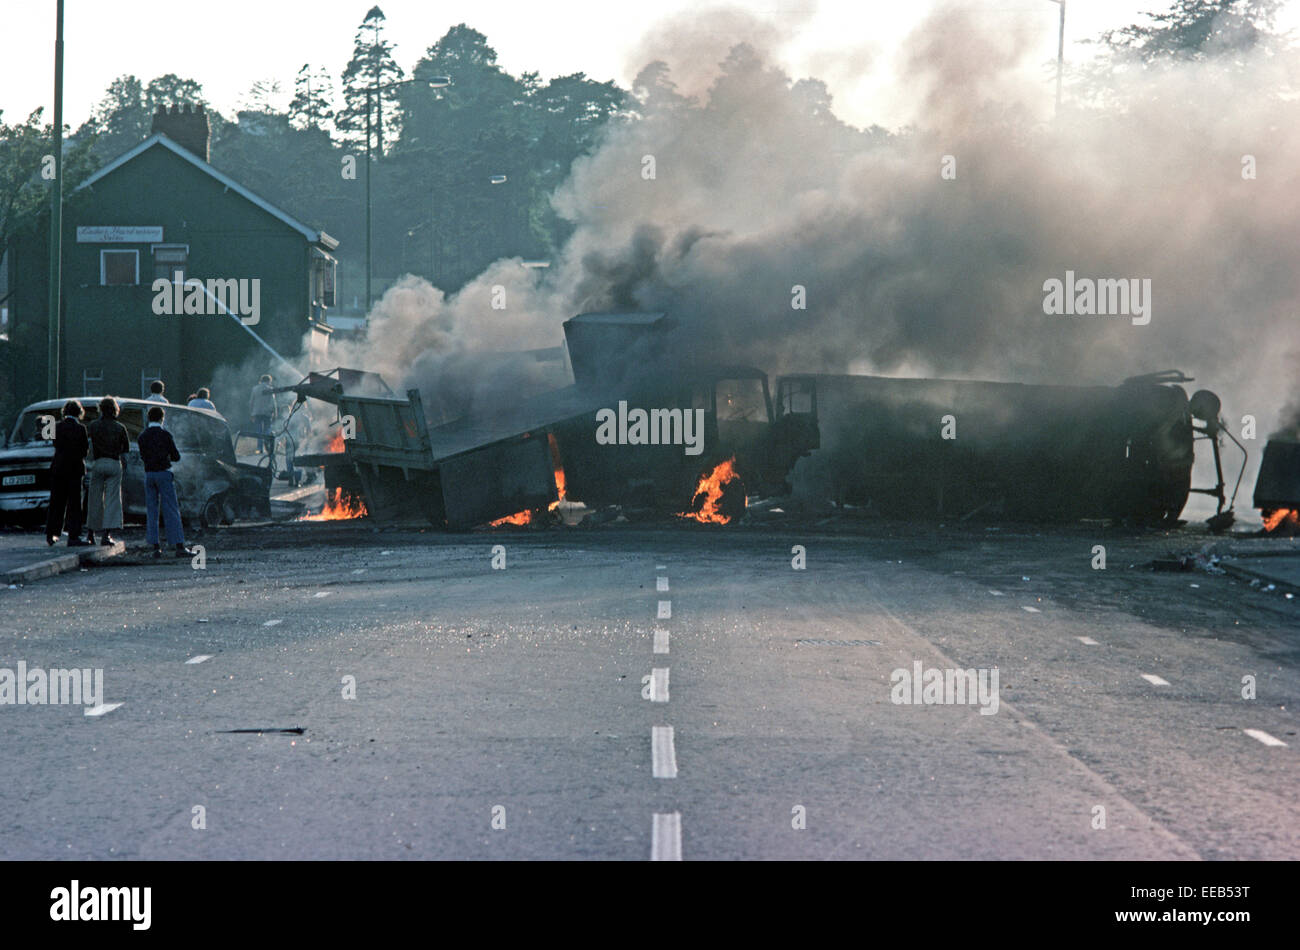 BELFAST, NORTHERN IRELAND - AUGUST 1976. Burning Hijacked Vehicles during Riots on The Falls Road, West Belfast during The Troubles, Northern Ireland. Stock Photo